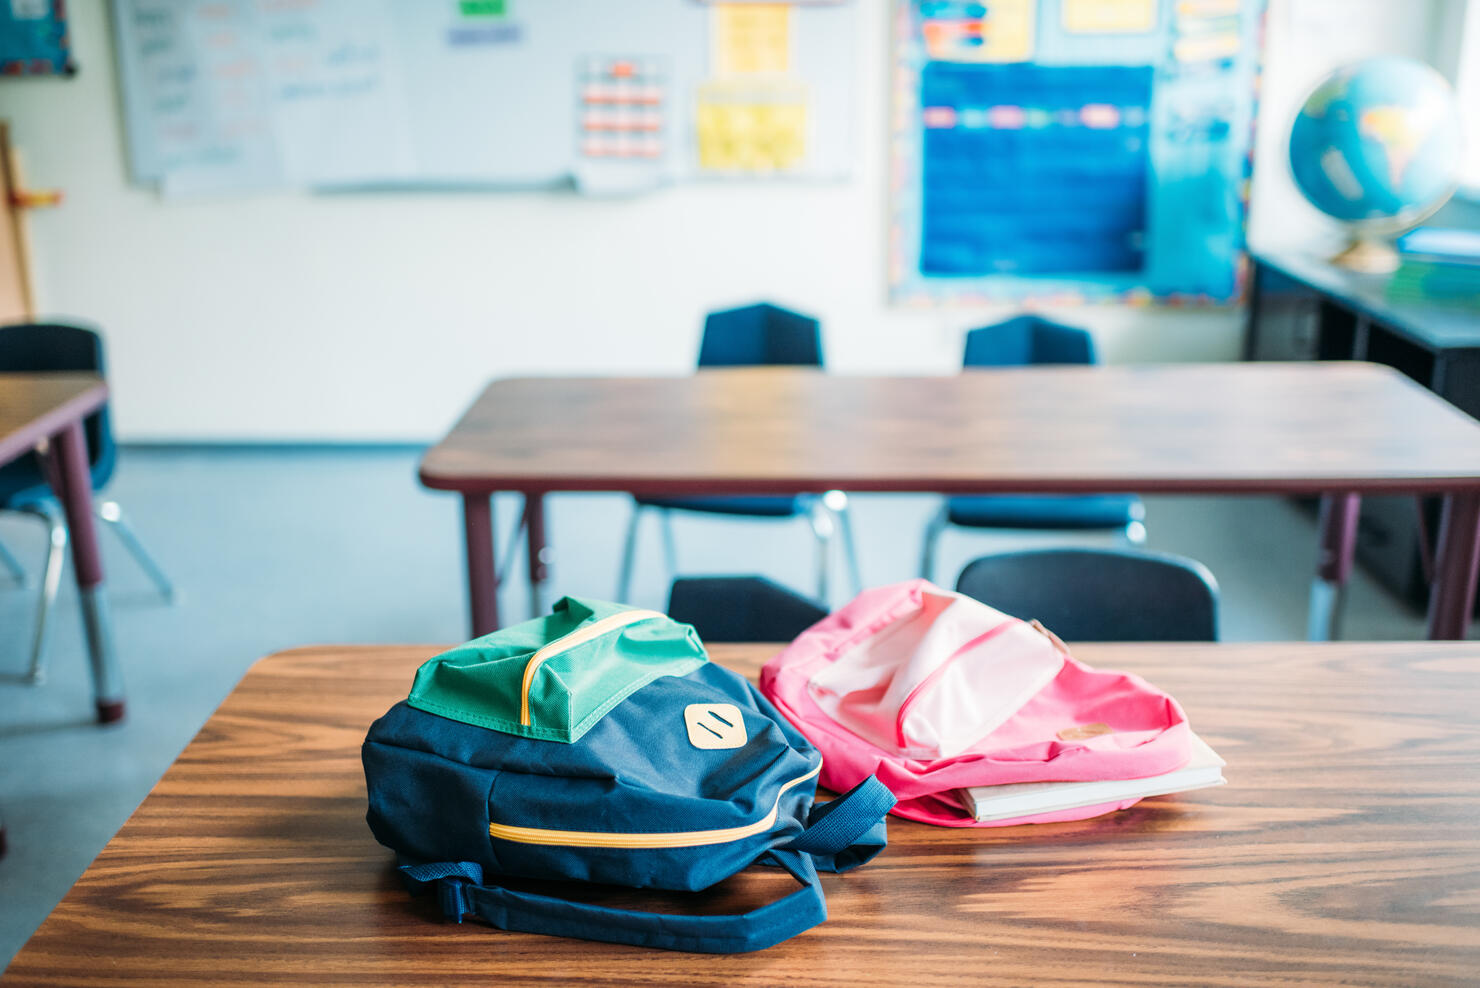 backpacks laying on desk